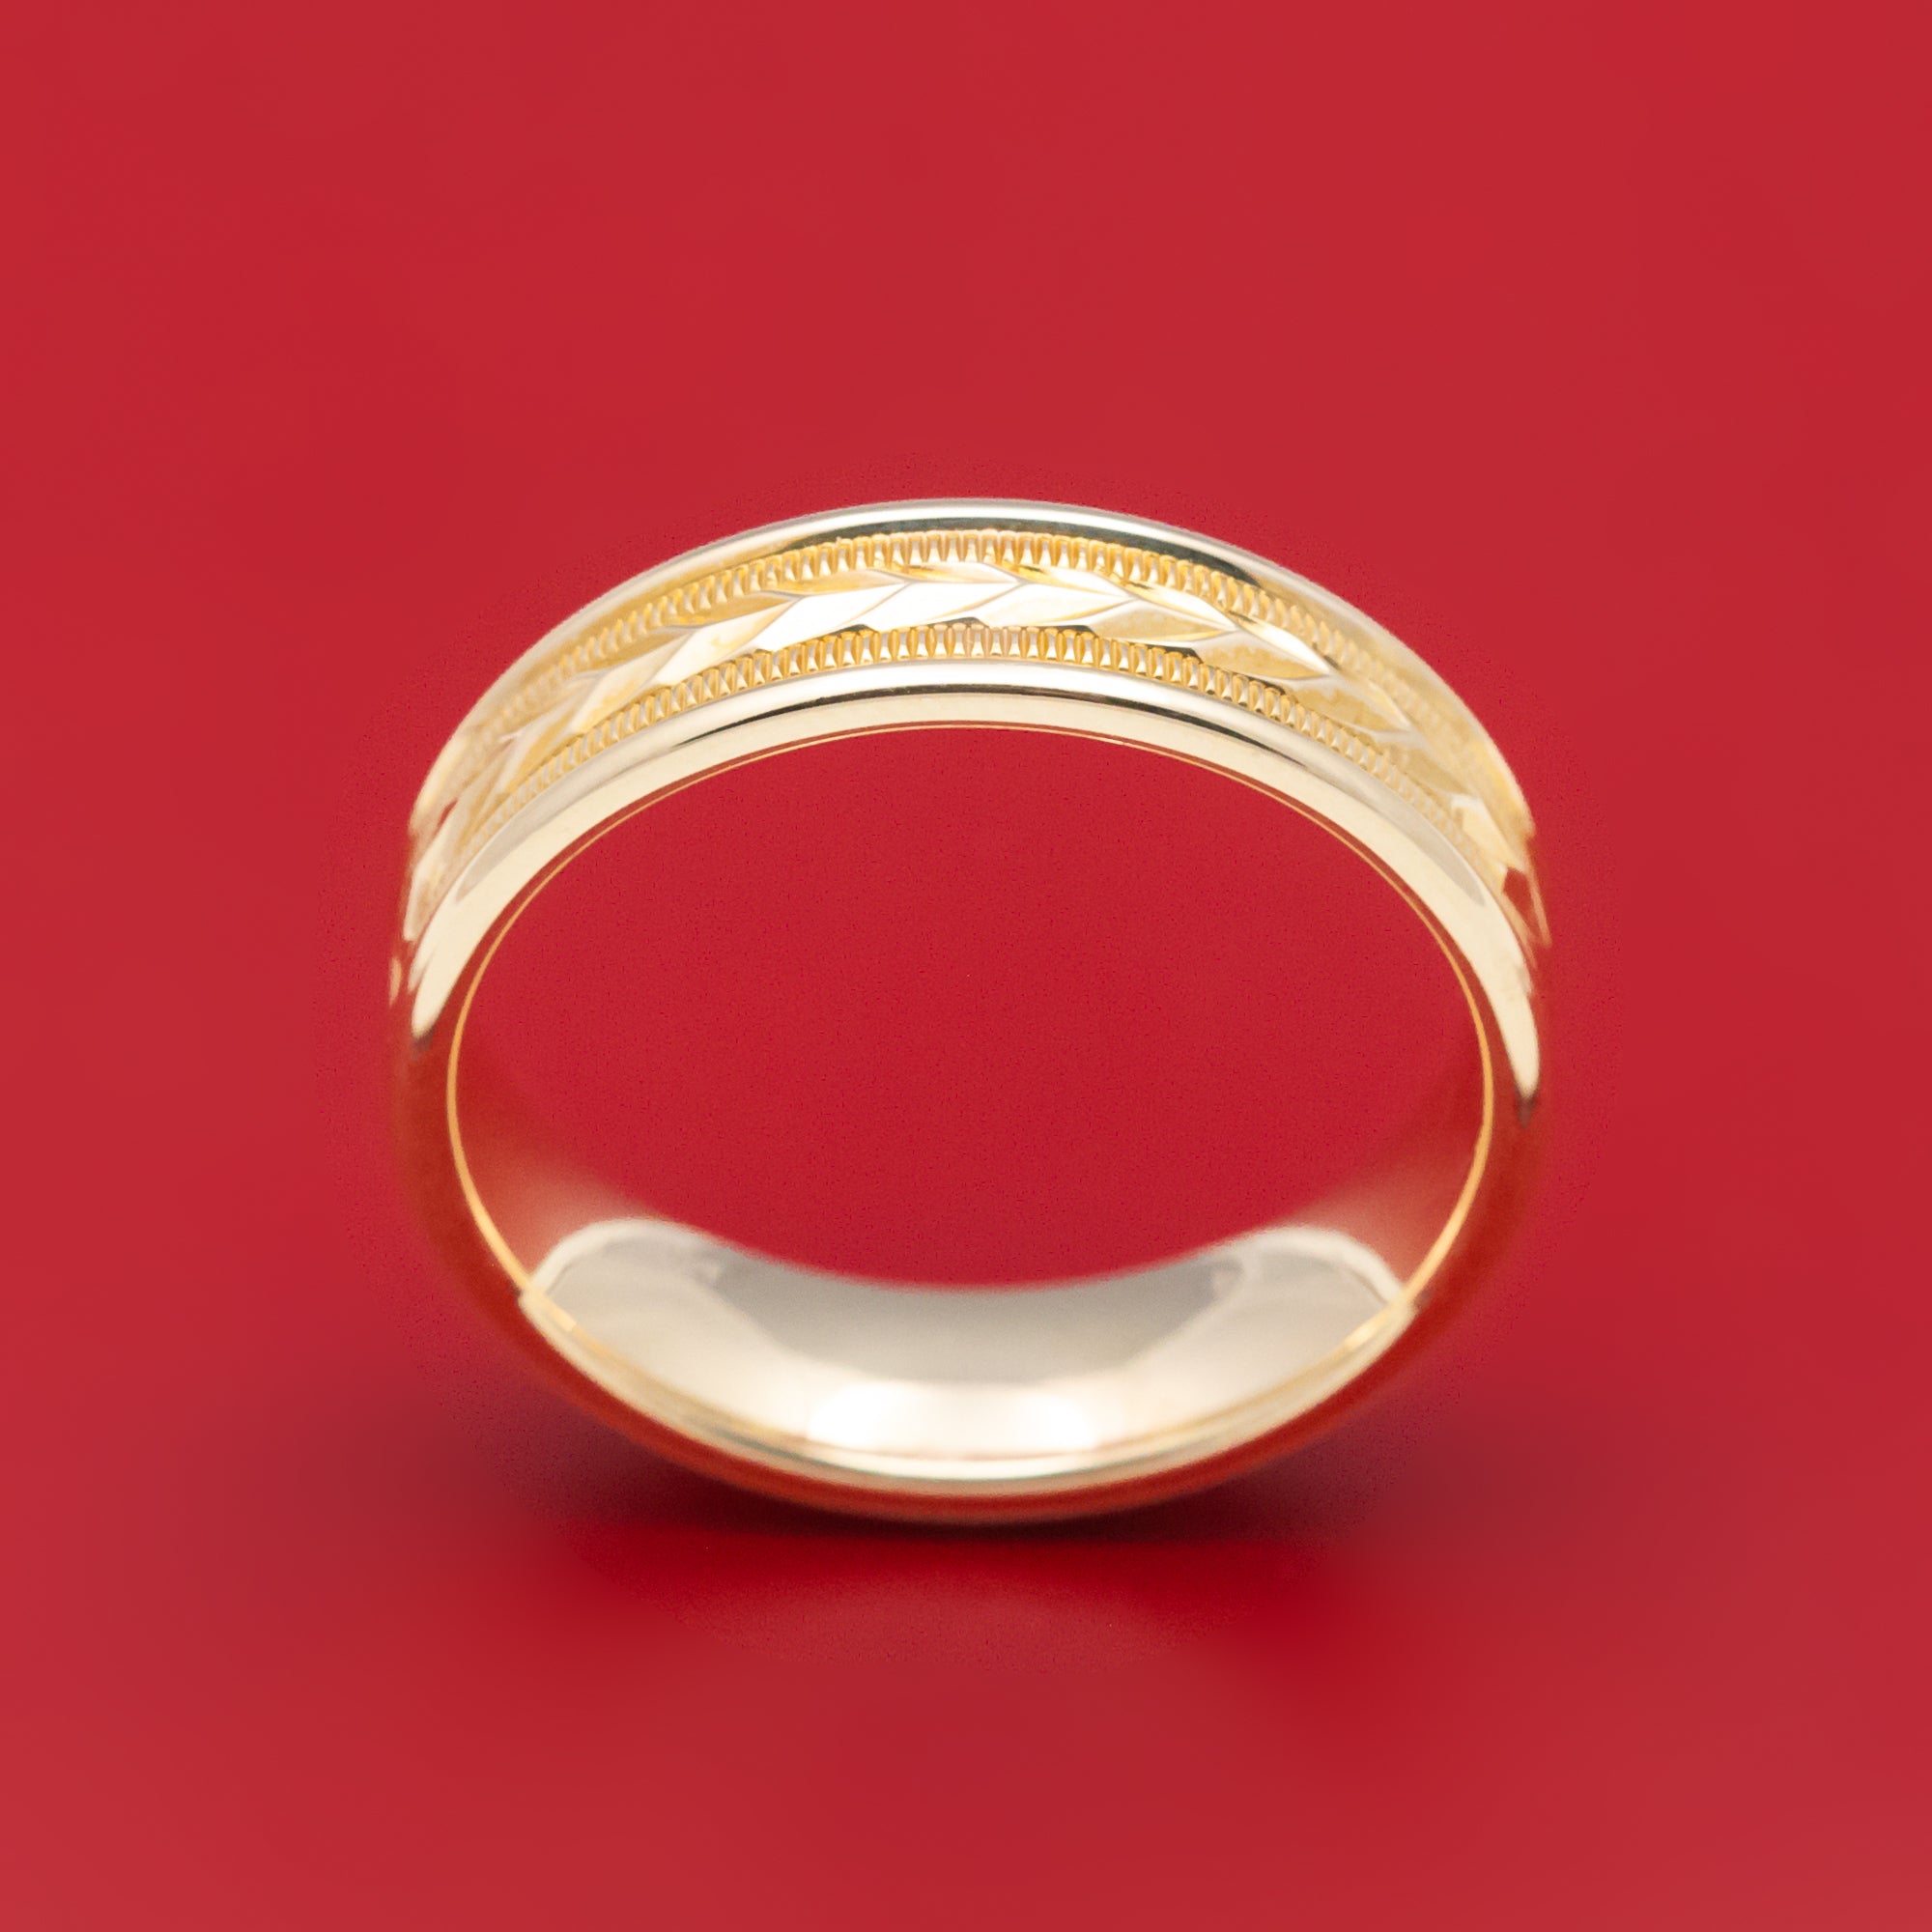 Buy quality Band ring designs in gold in Pune